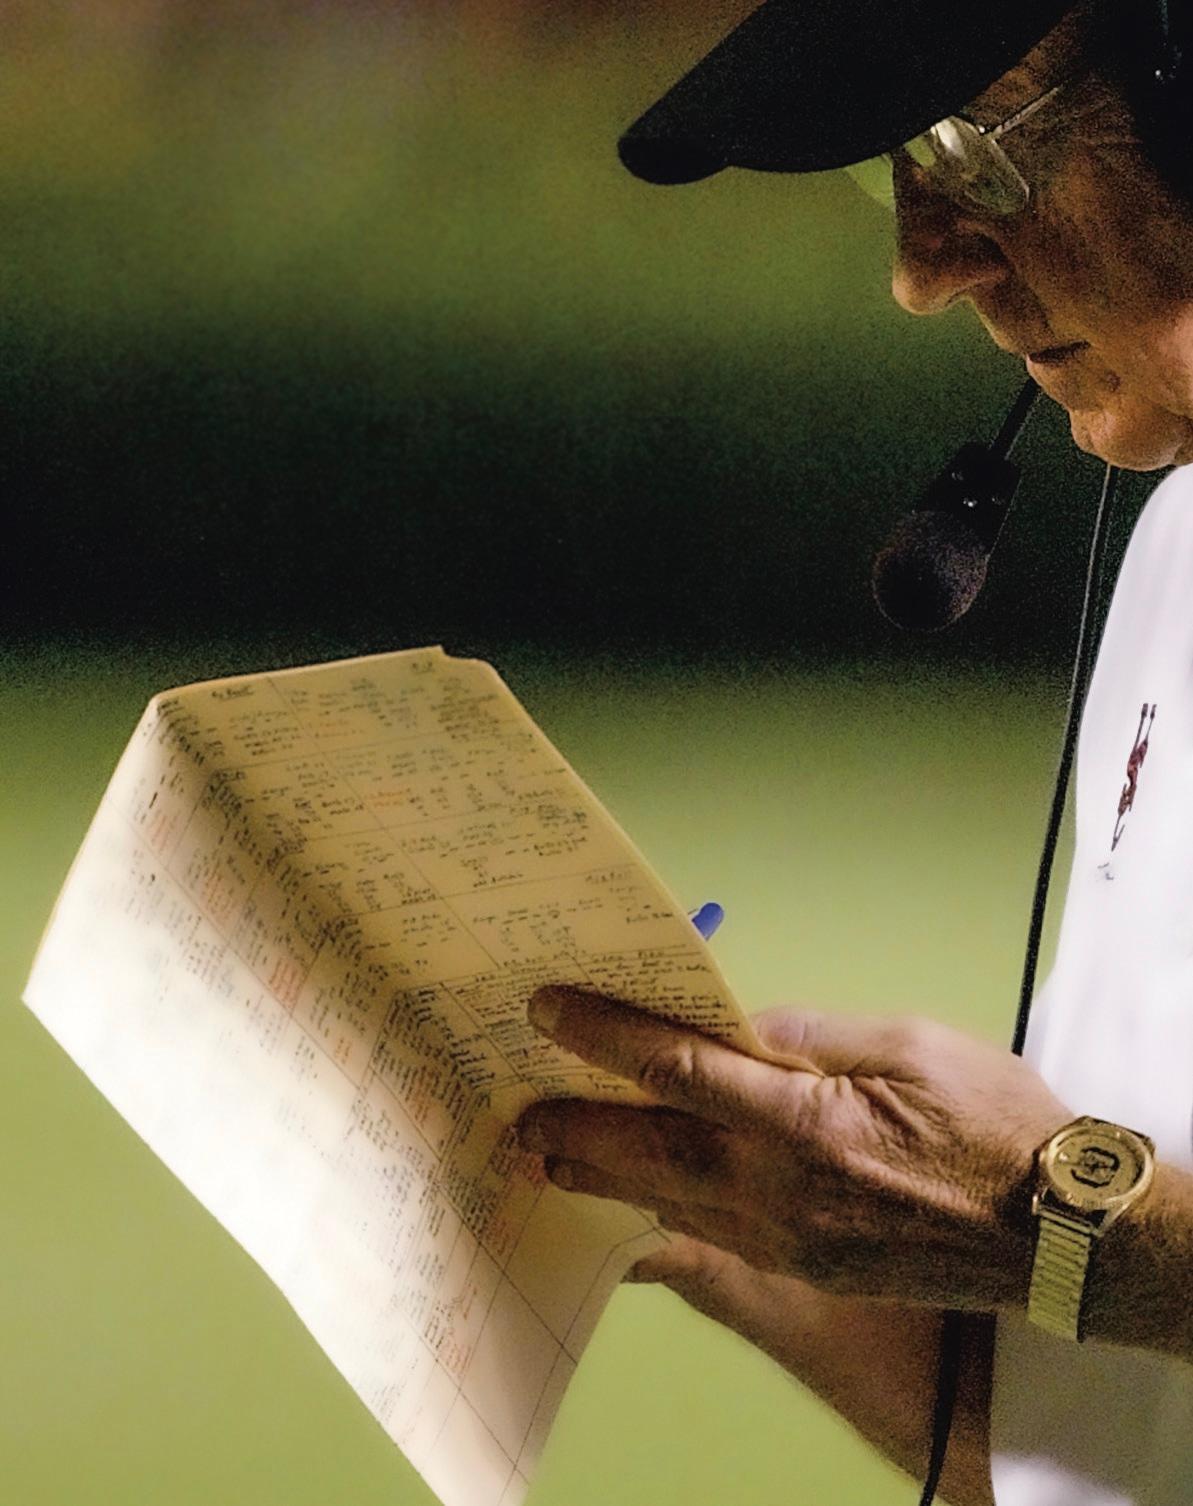 Mr. Holtz looks over his playbook during a South Carolina Gamecocks game, September 2004. (Streeter Lecka/Stringer/Getty Images)